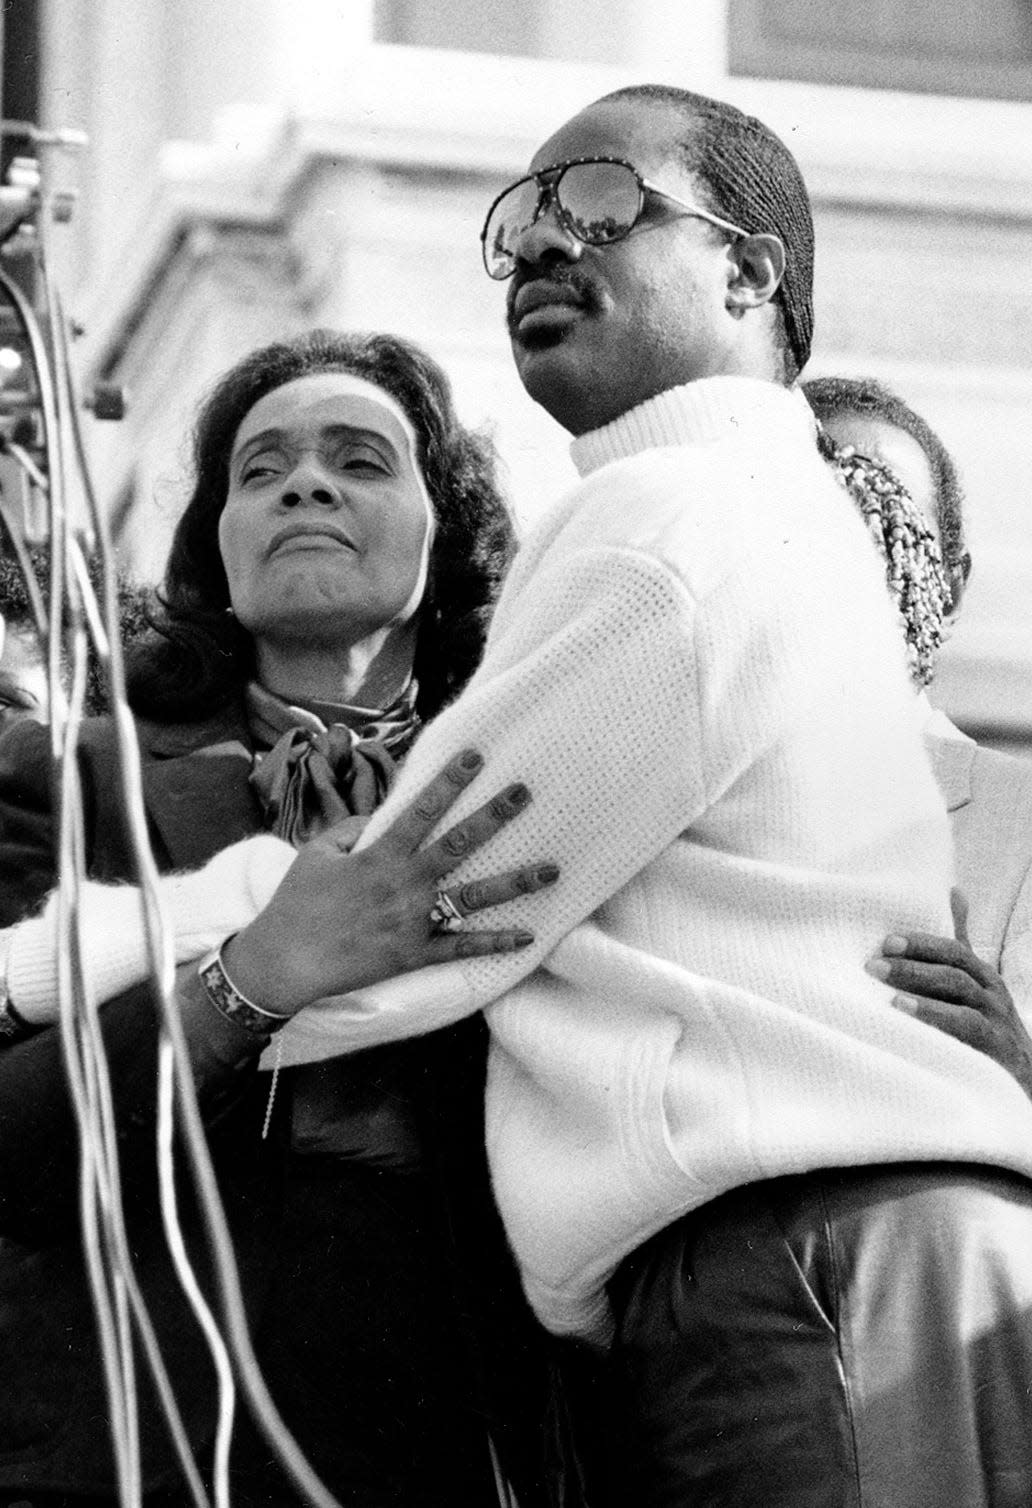 Coretta Scott King, widow of the Rev. Martin Luther King Jr., embraces singer Stevie Wonder during a celebration on the steps of the U.S. Capitol Building in Washington, D.C., Nov. 3, 1983 a day after U.S. President Ronald Reagan signed a bill making the civil rights leader's birthday a national holiday.